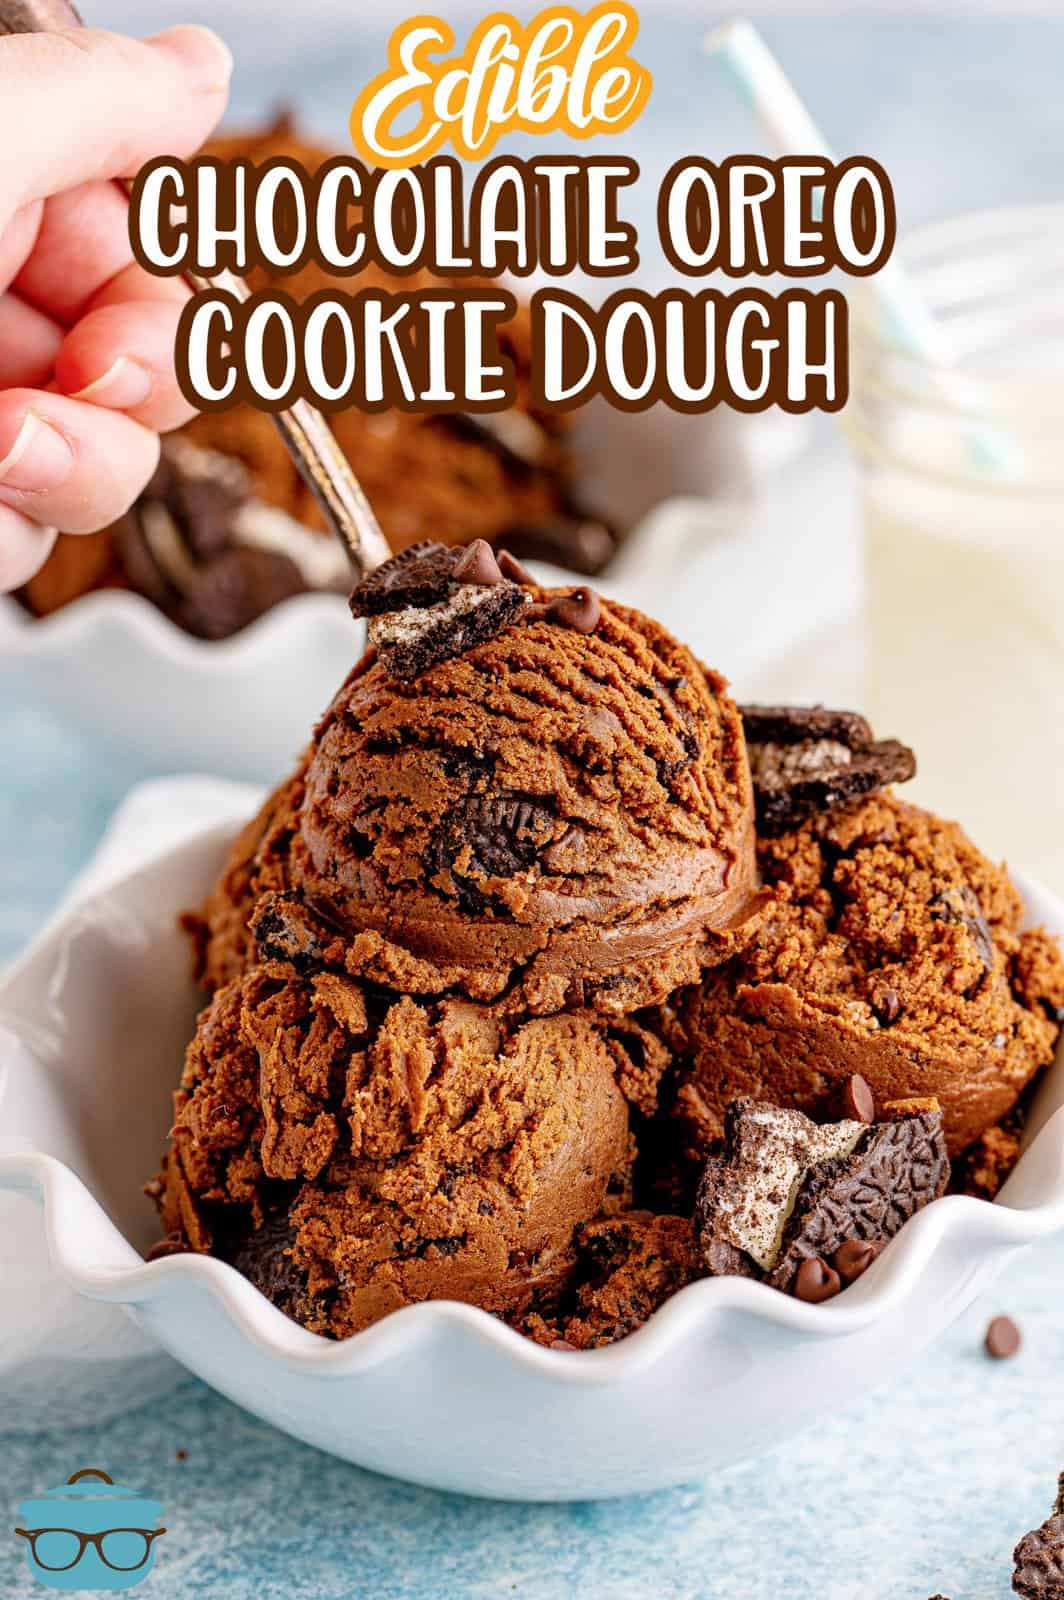 Pinterest image of Edible Chocolate Oreo Cookie Dough in bowl with hand holding spoon in it.